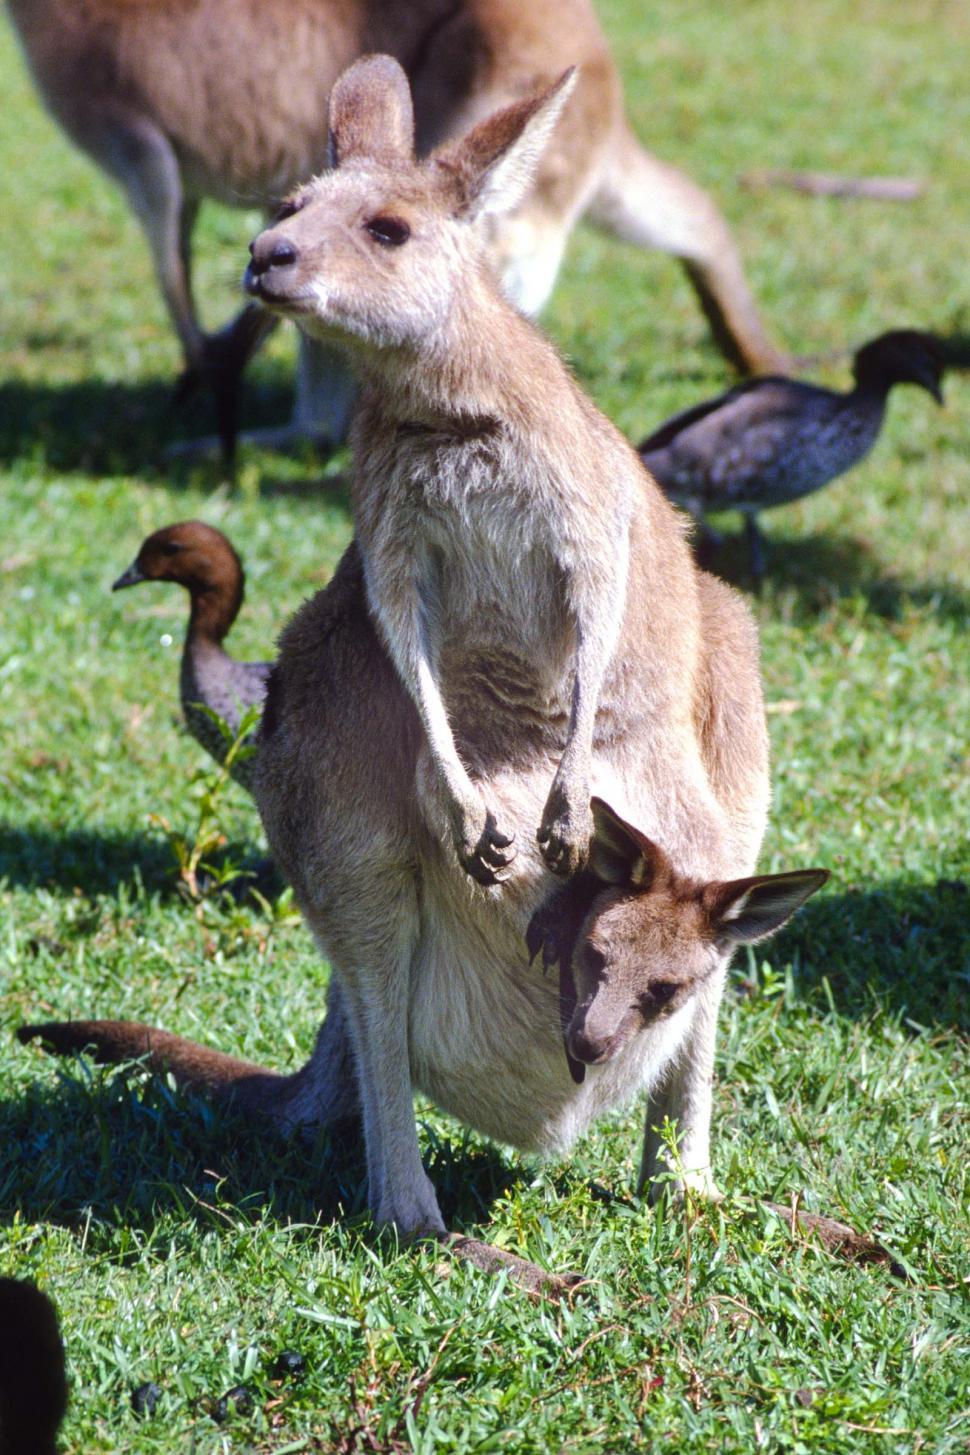 Free Image of Group of Kangaroos and Ducks in Grass Field 